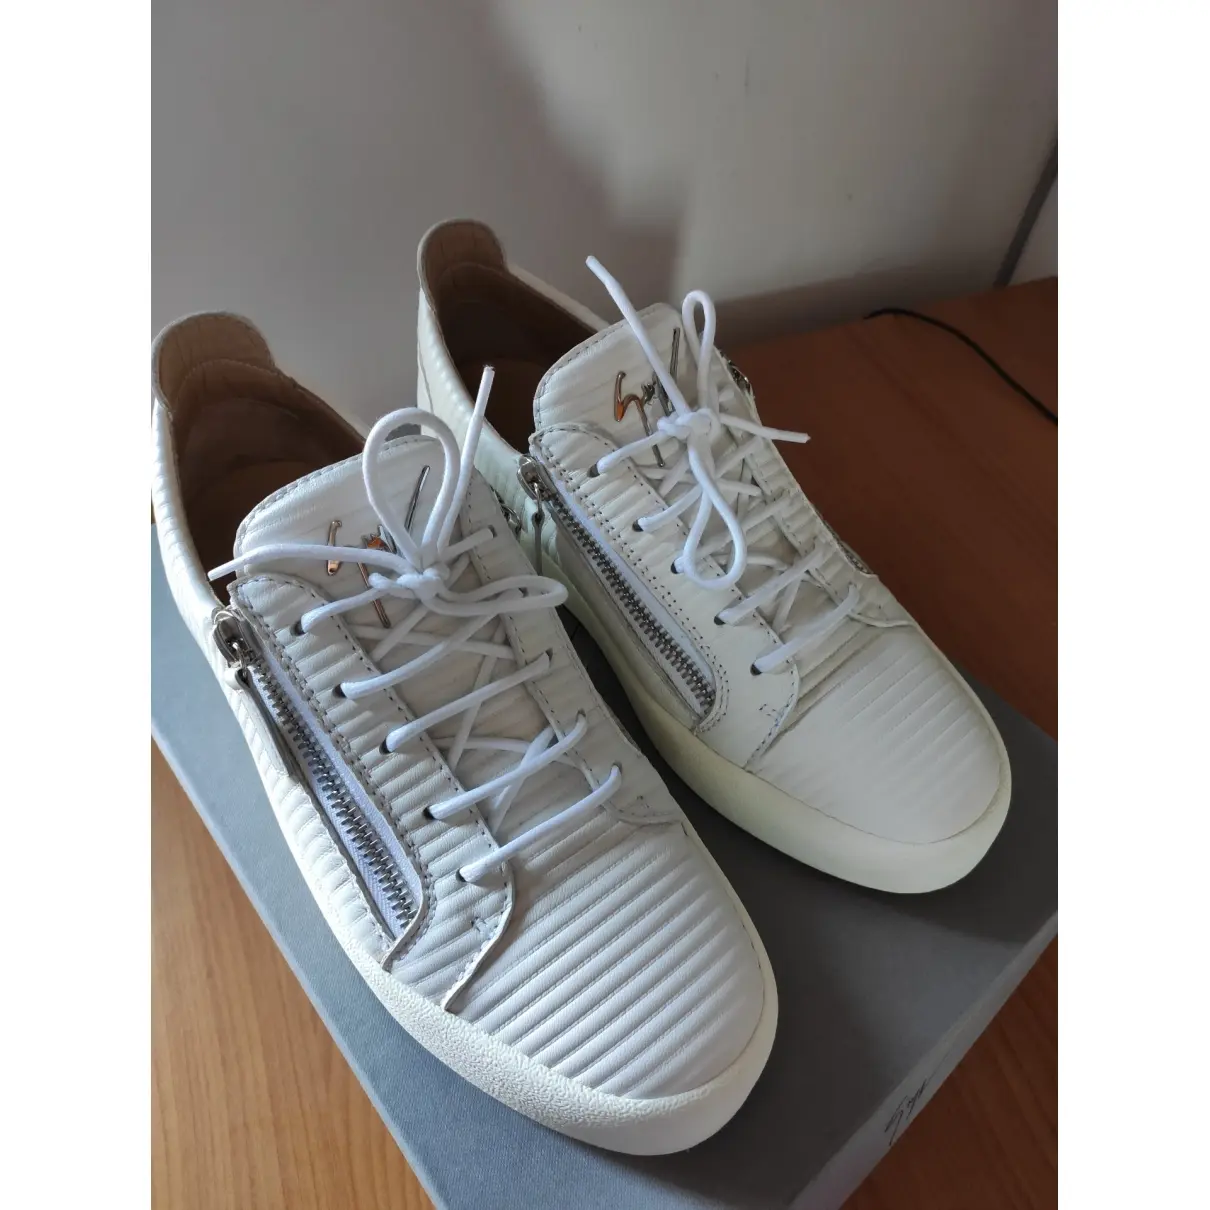 Giuseppe Zanotti Leather low trainers for sale